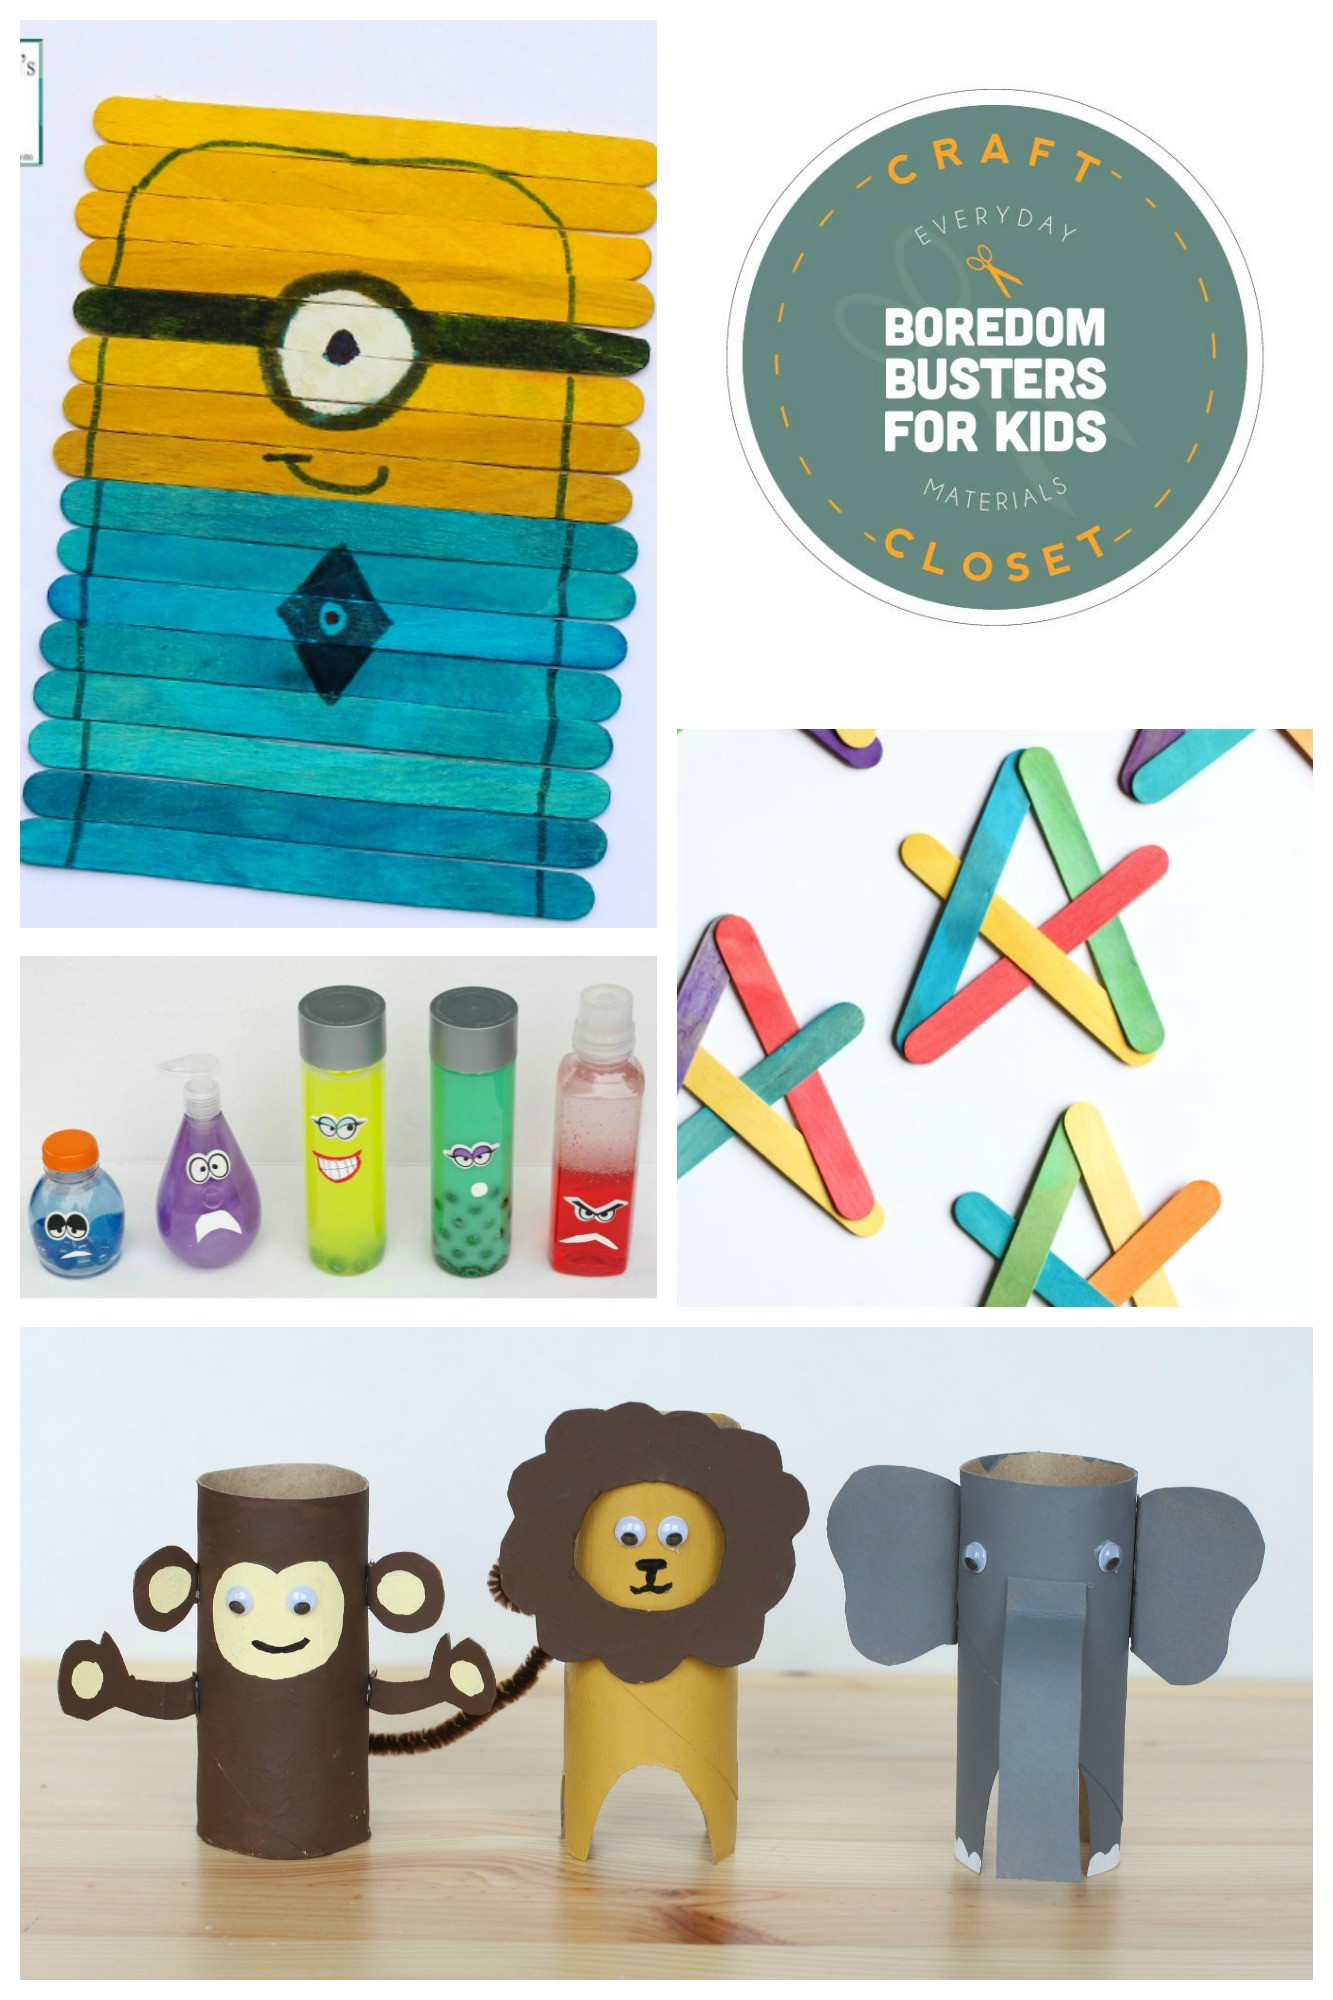 Fun Crafts To Do With Toddlers
 25 Crafts and Activities for Kids Using Everyday